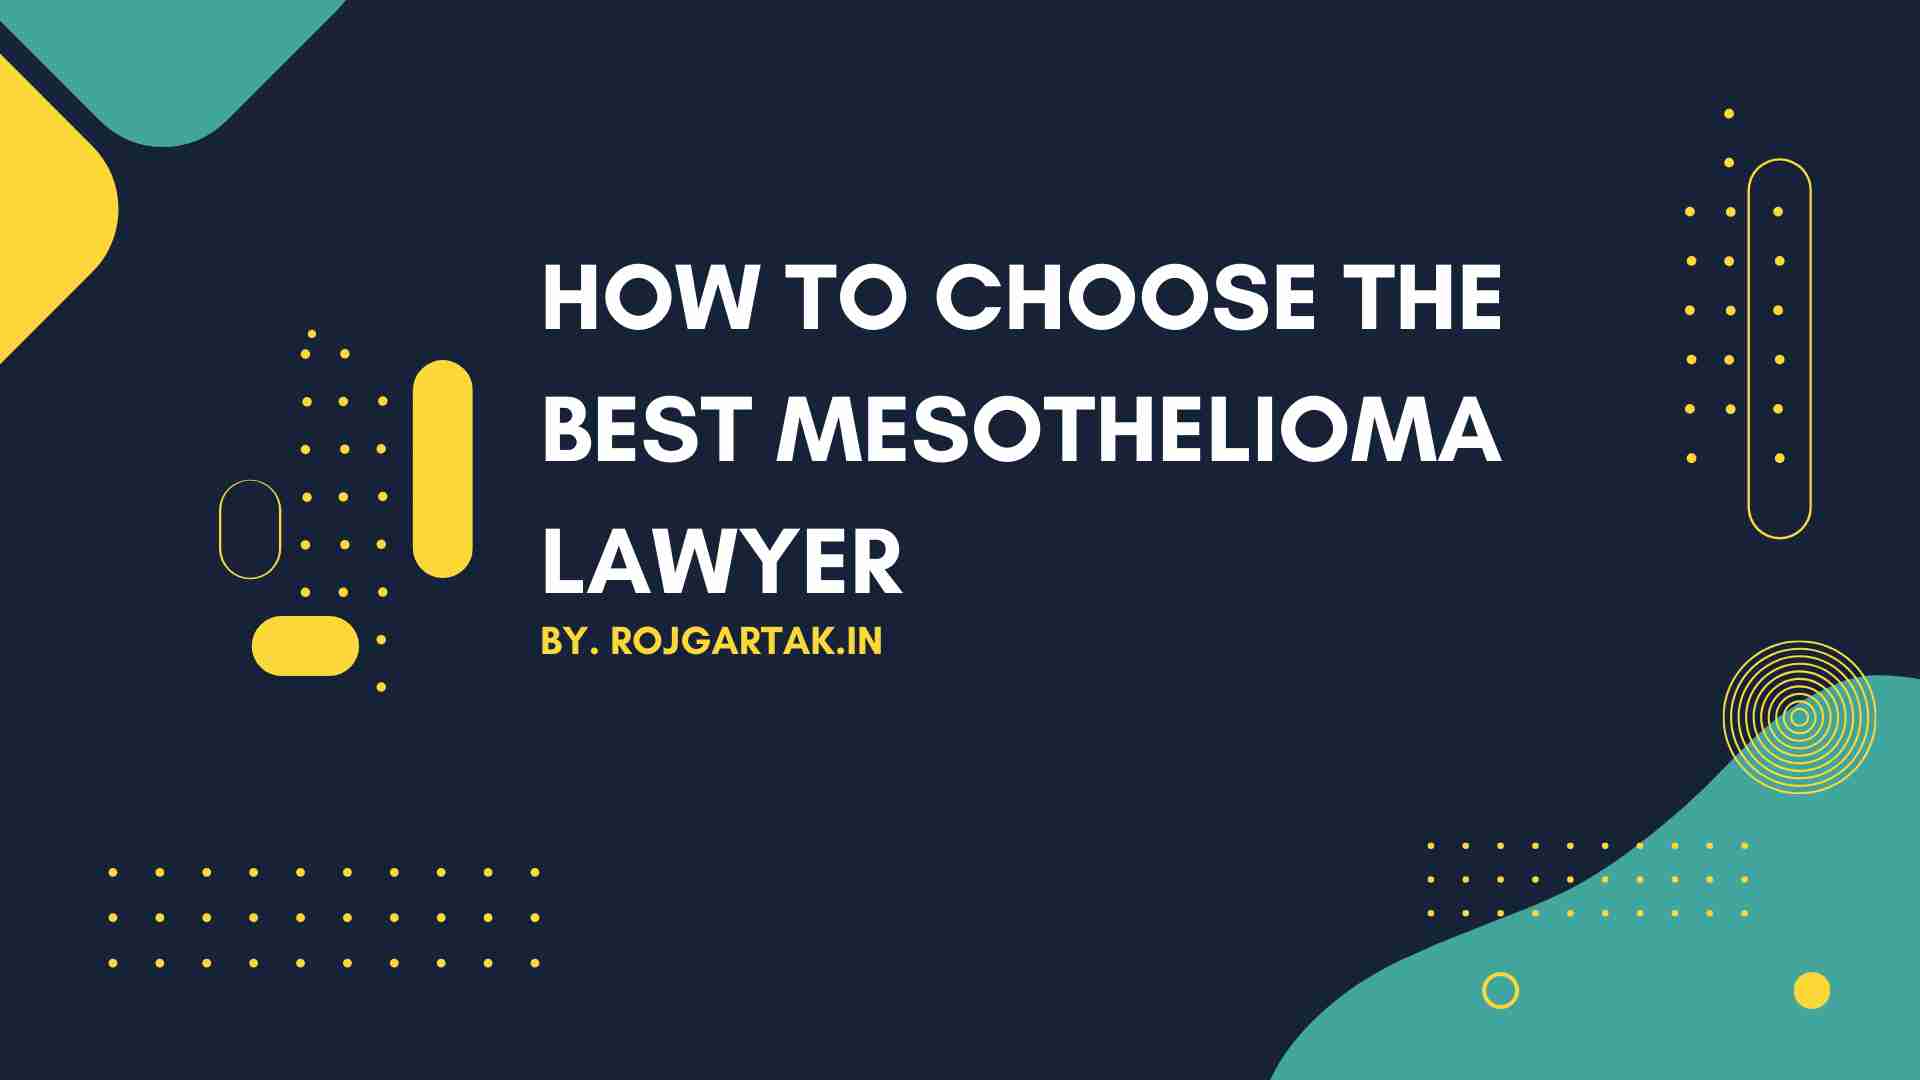 How to Choose the best Mesothelioma Lawyer